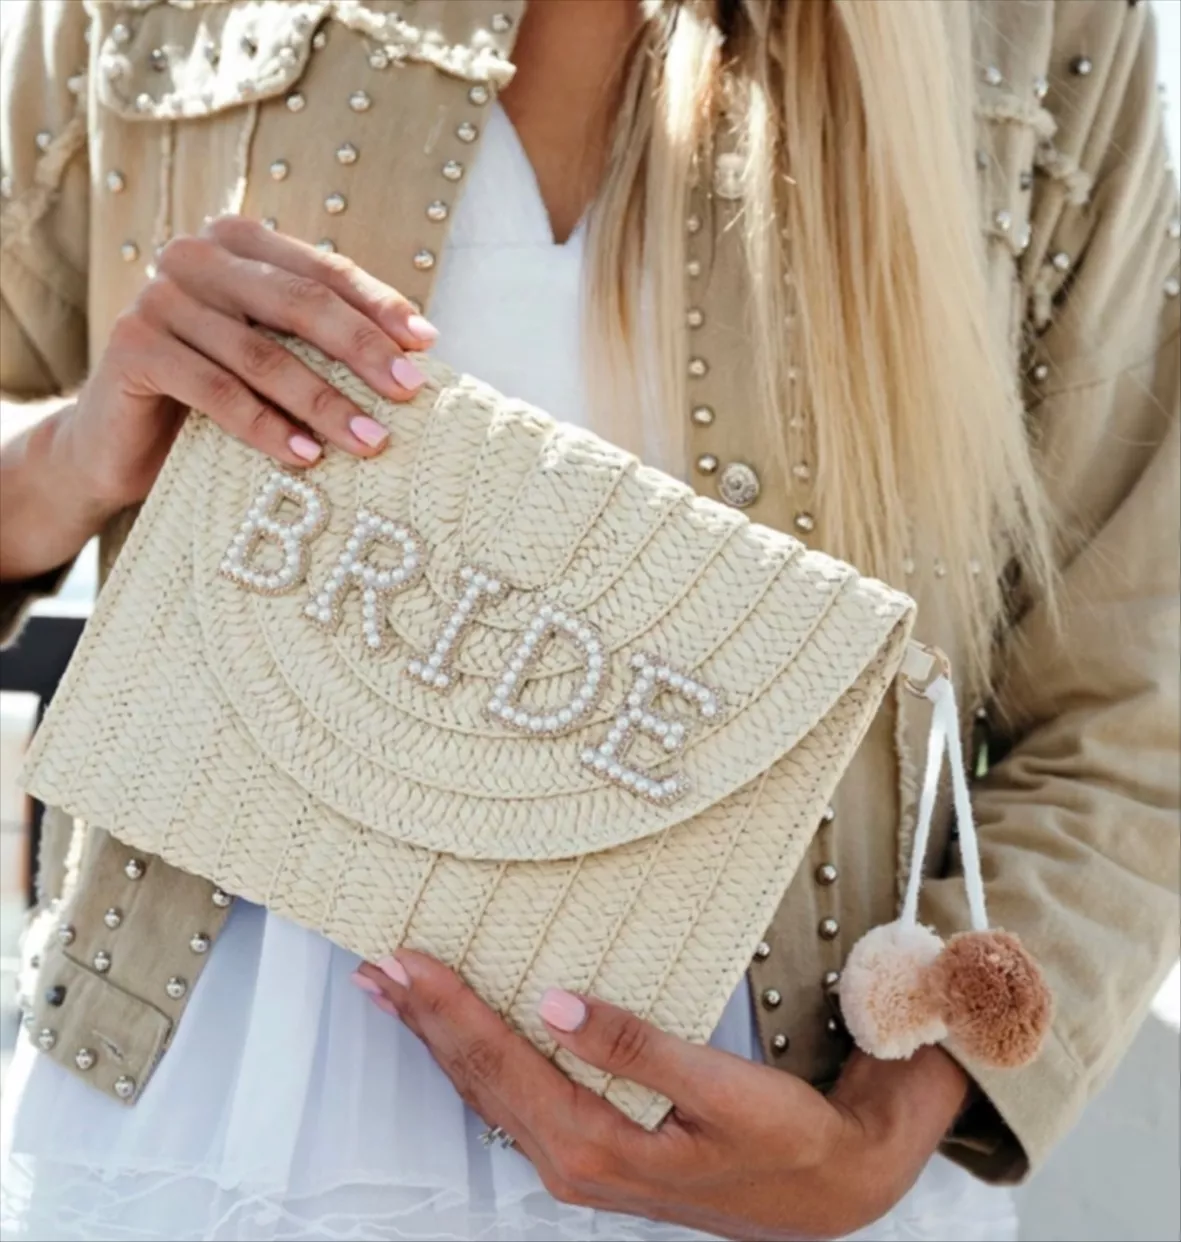 Bride Purse Bridal Shower Gift for Bride to Be Gift Ideas 